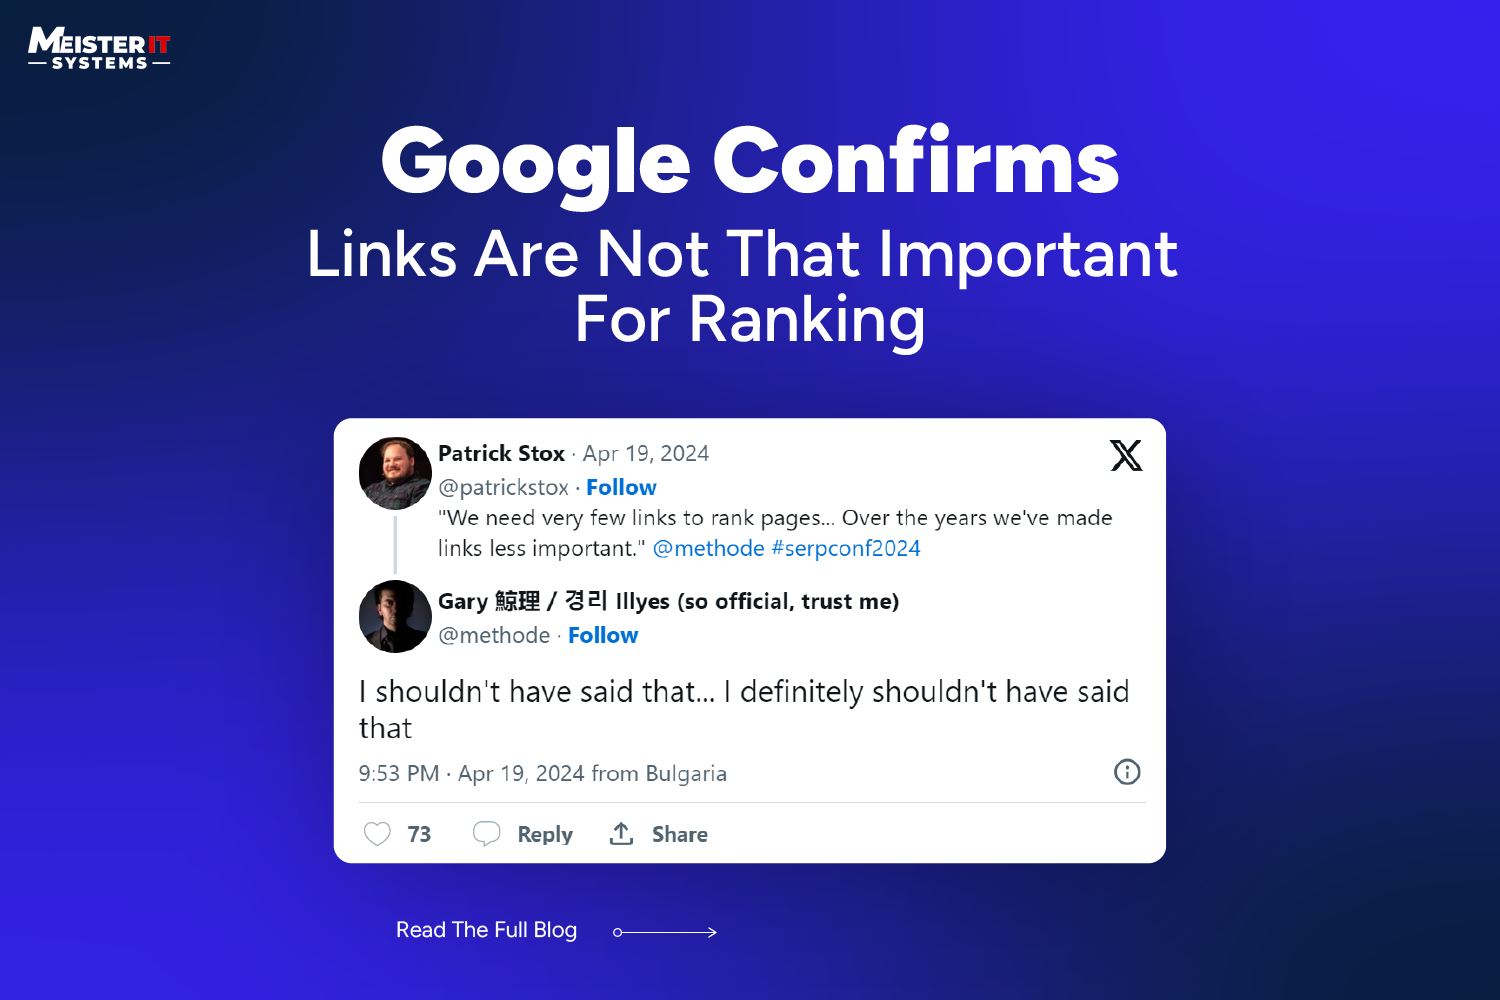 Google Confirms Links Are Not That Important For Ranking